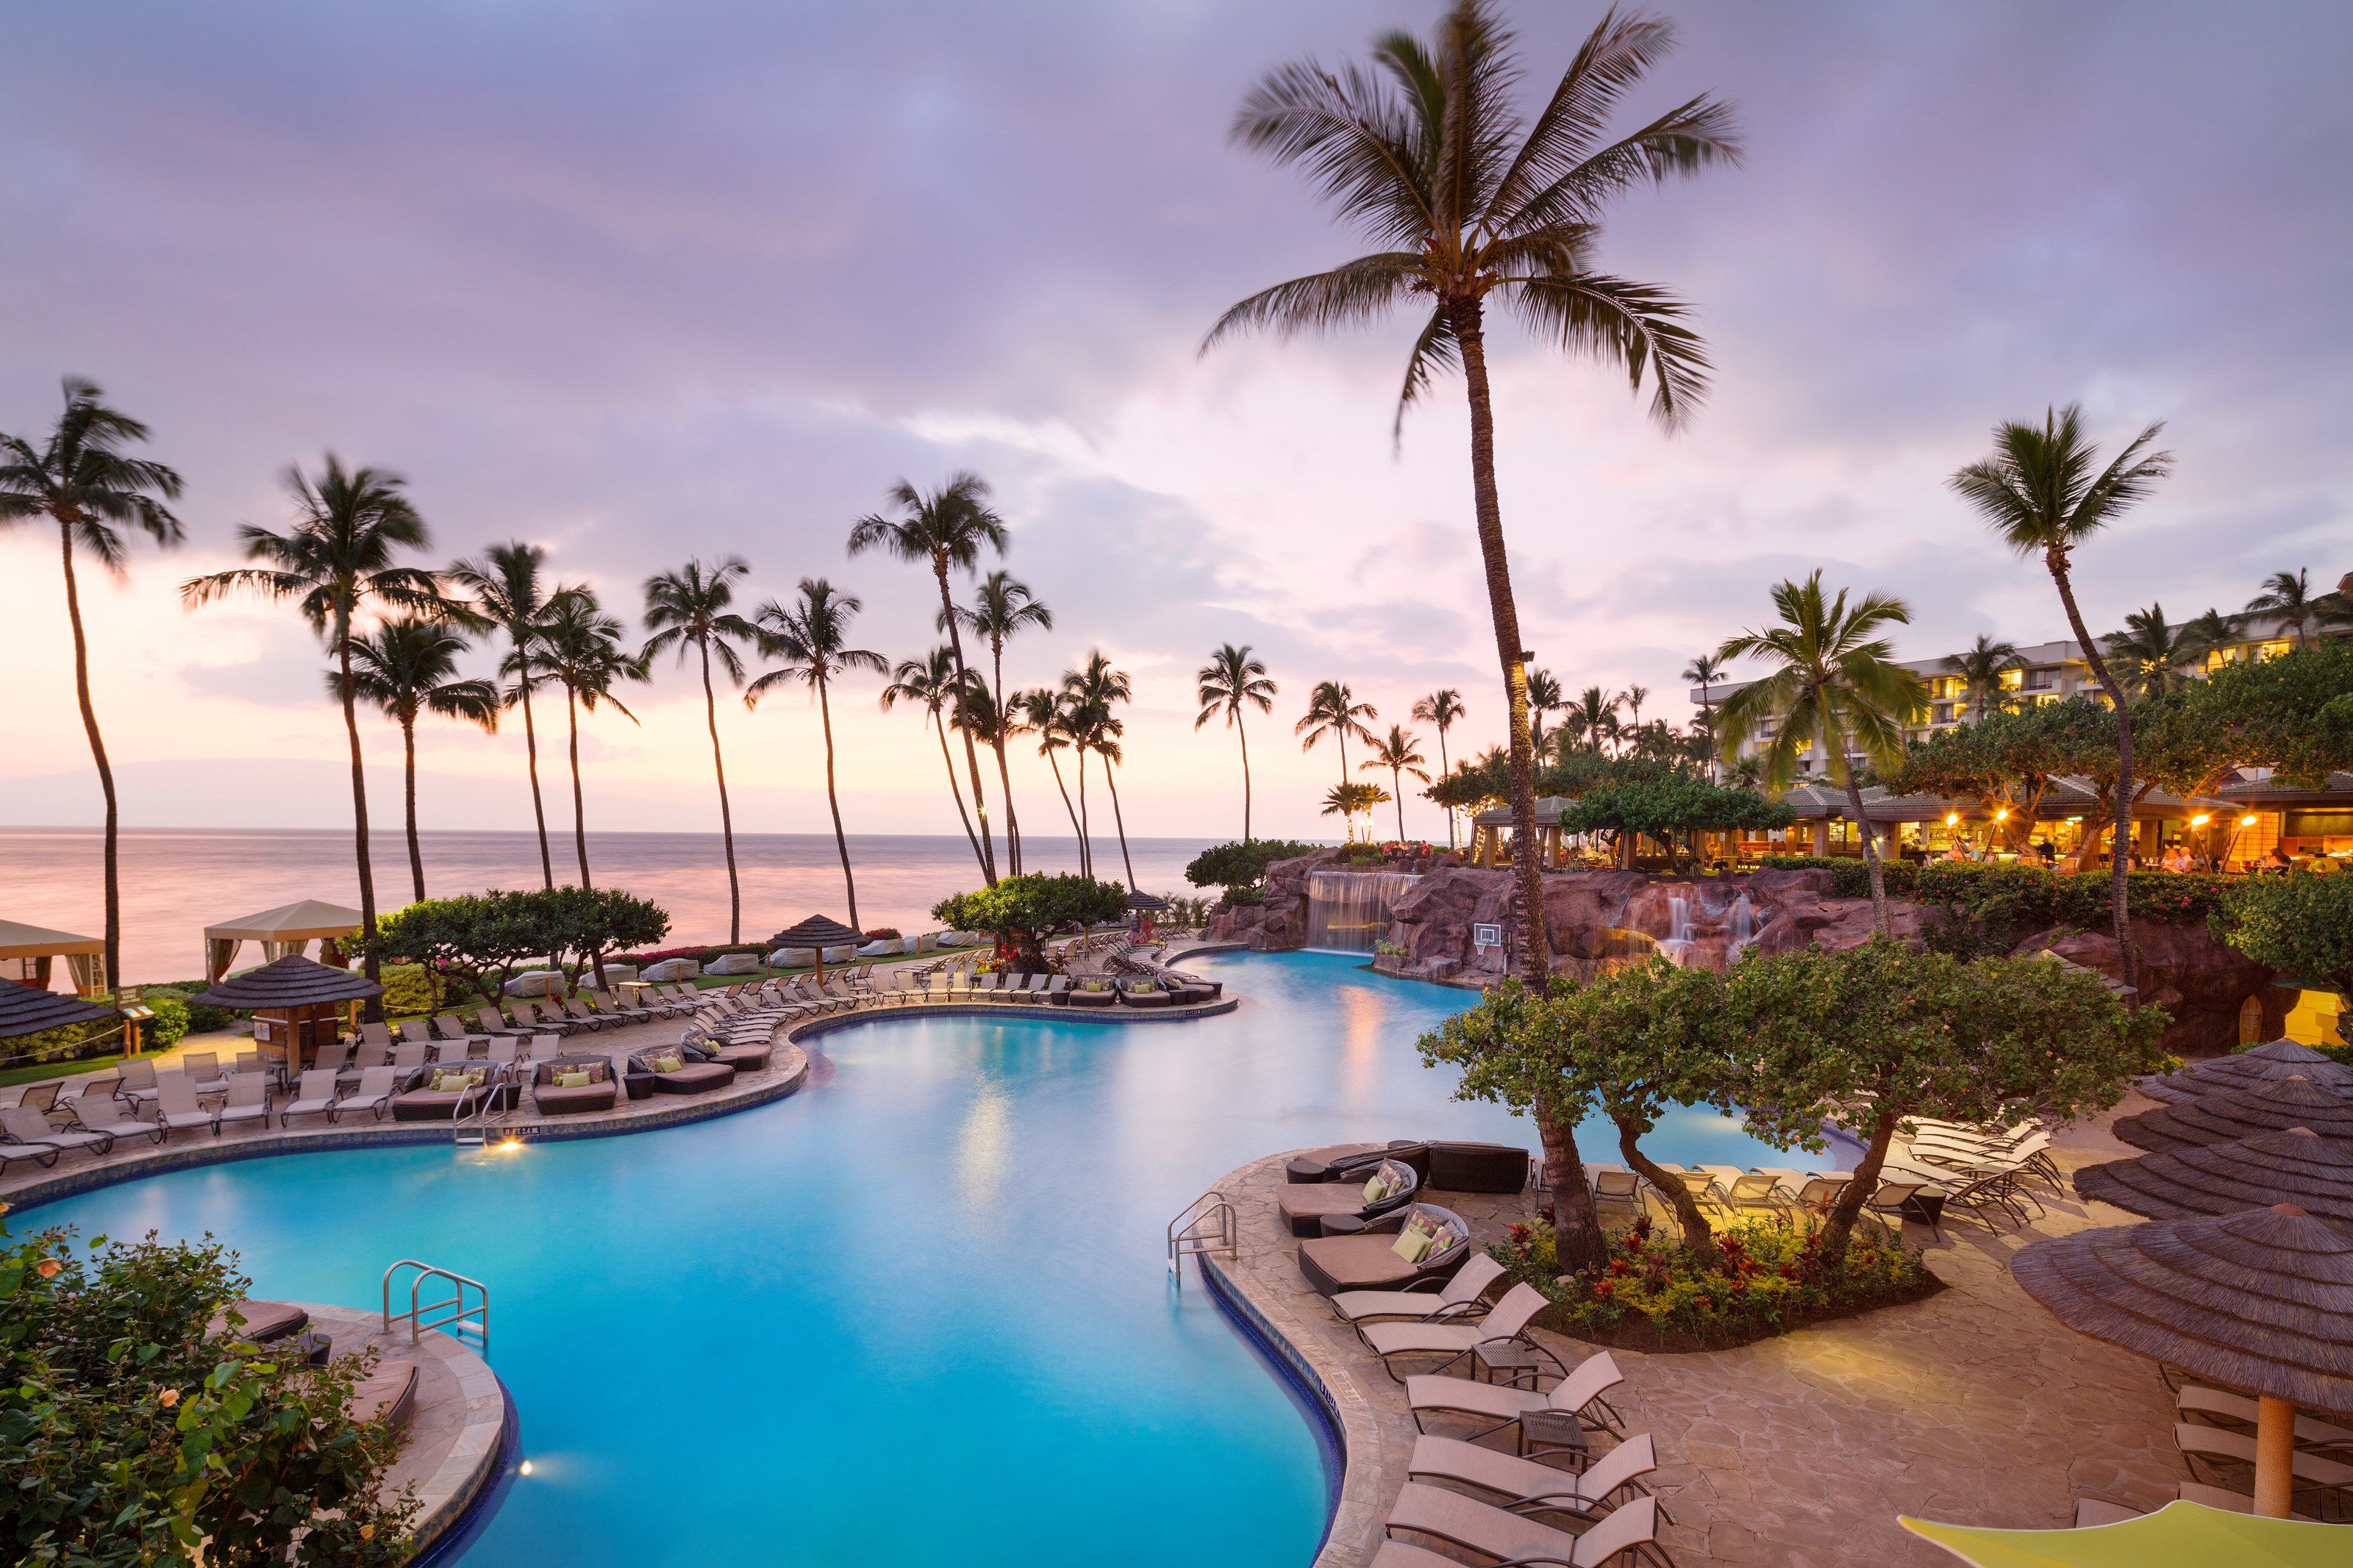 CheapAir - Get $10 off your flight to Maui!